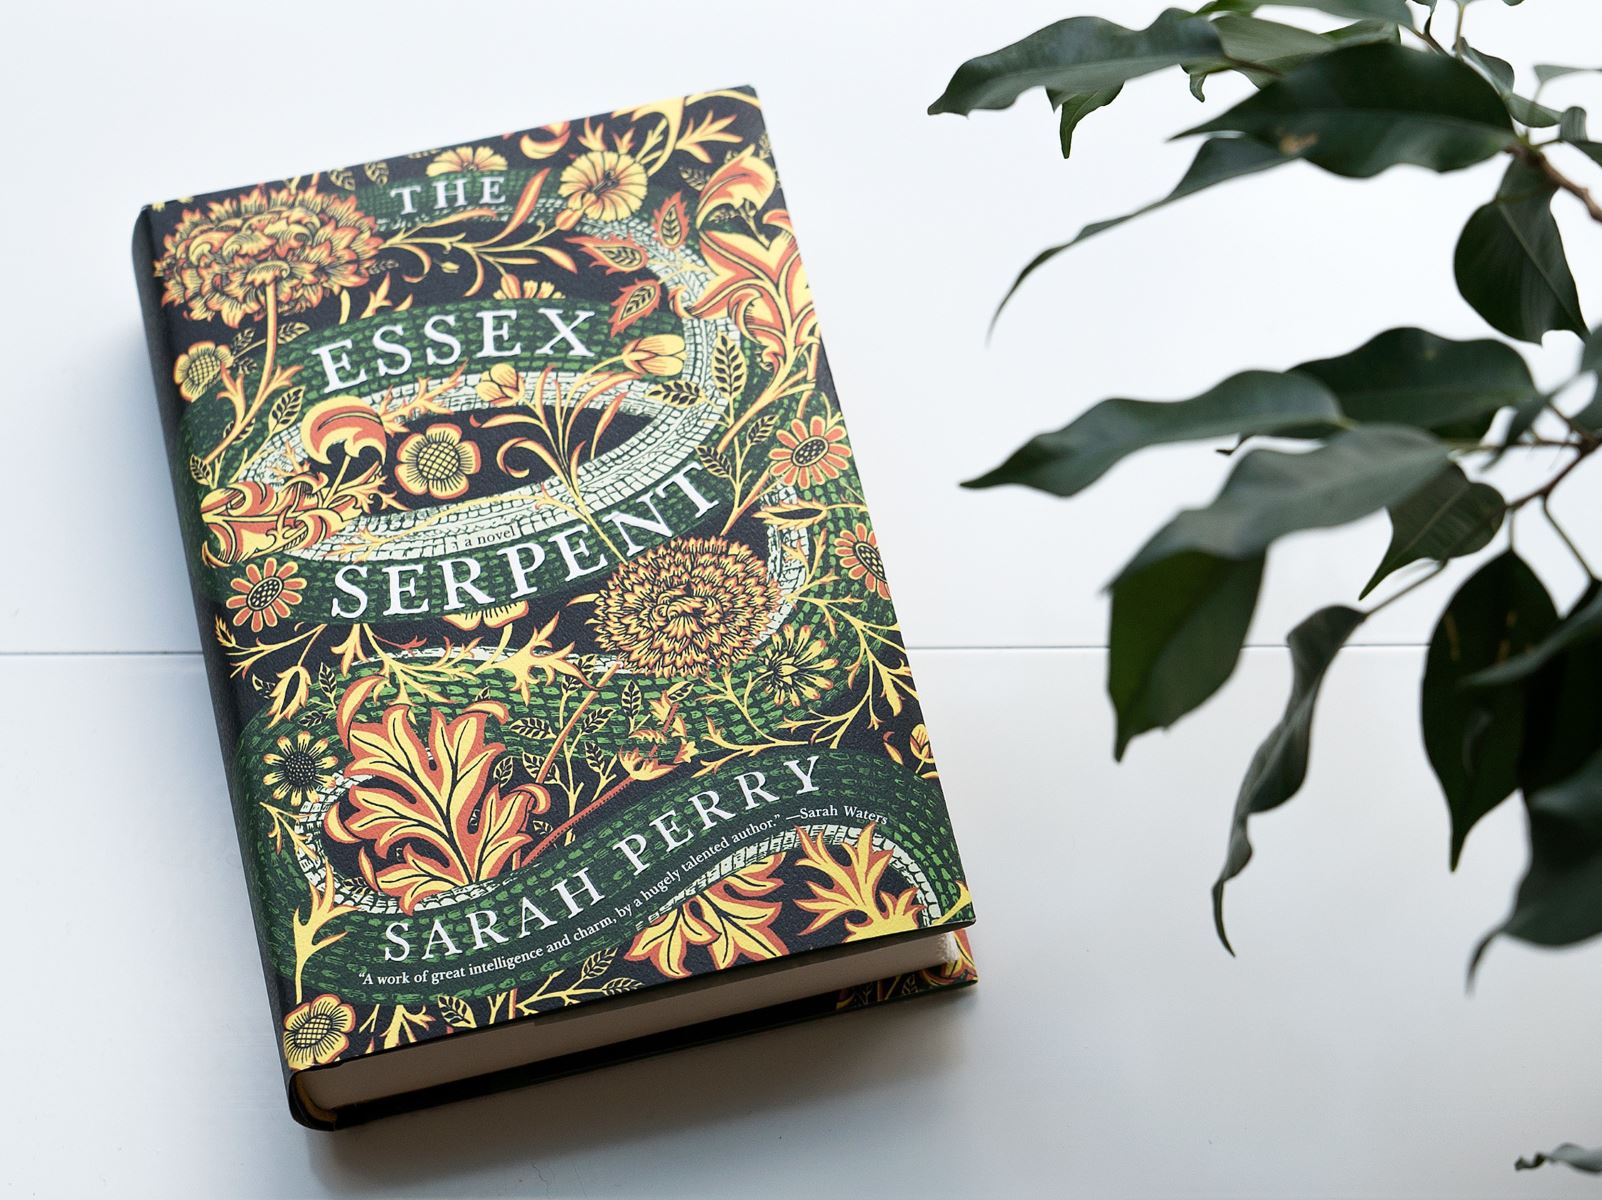 20-extraordinary-facts-about-the-essex-serpent-sarah-perry